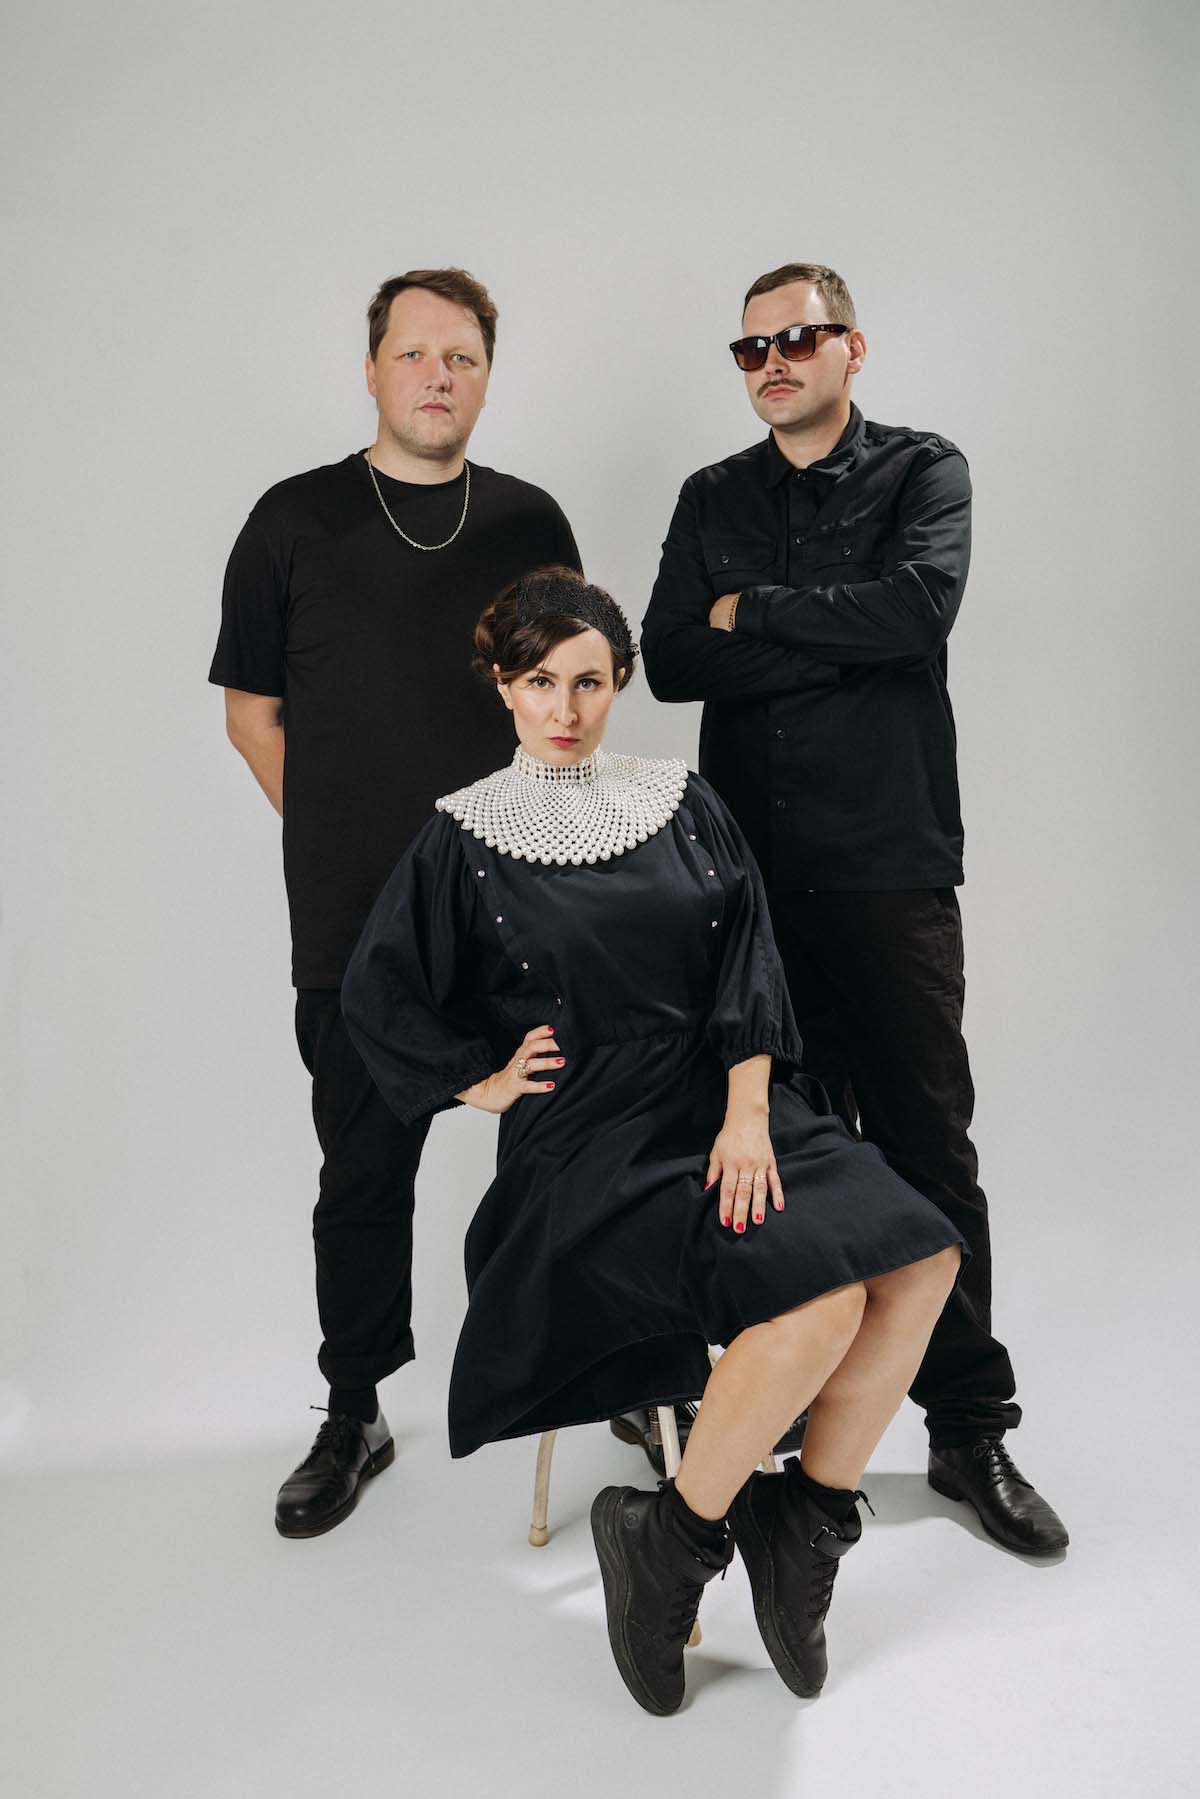 A woman and two men pose for the camera in front of an off-white background. The band Dina Summer is dressed completely in black. The woman in the middle wears a white, flared collar over her black dress and her brown hair in an updo. She sits on a stool in front of the other two, has her right hand resting in her side and the other on her legs that are bent to the side, and she puts her feet in black trainers up on her toes. The one at the back right with short hair has his arms crossed and is wearing a black shirt, sunglasses and moustache. The other one, also with short brown hair, has a black T-shirt on and his arms behind his back.